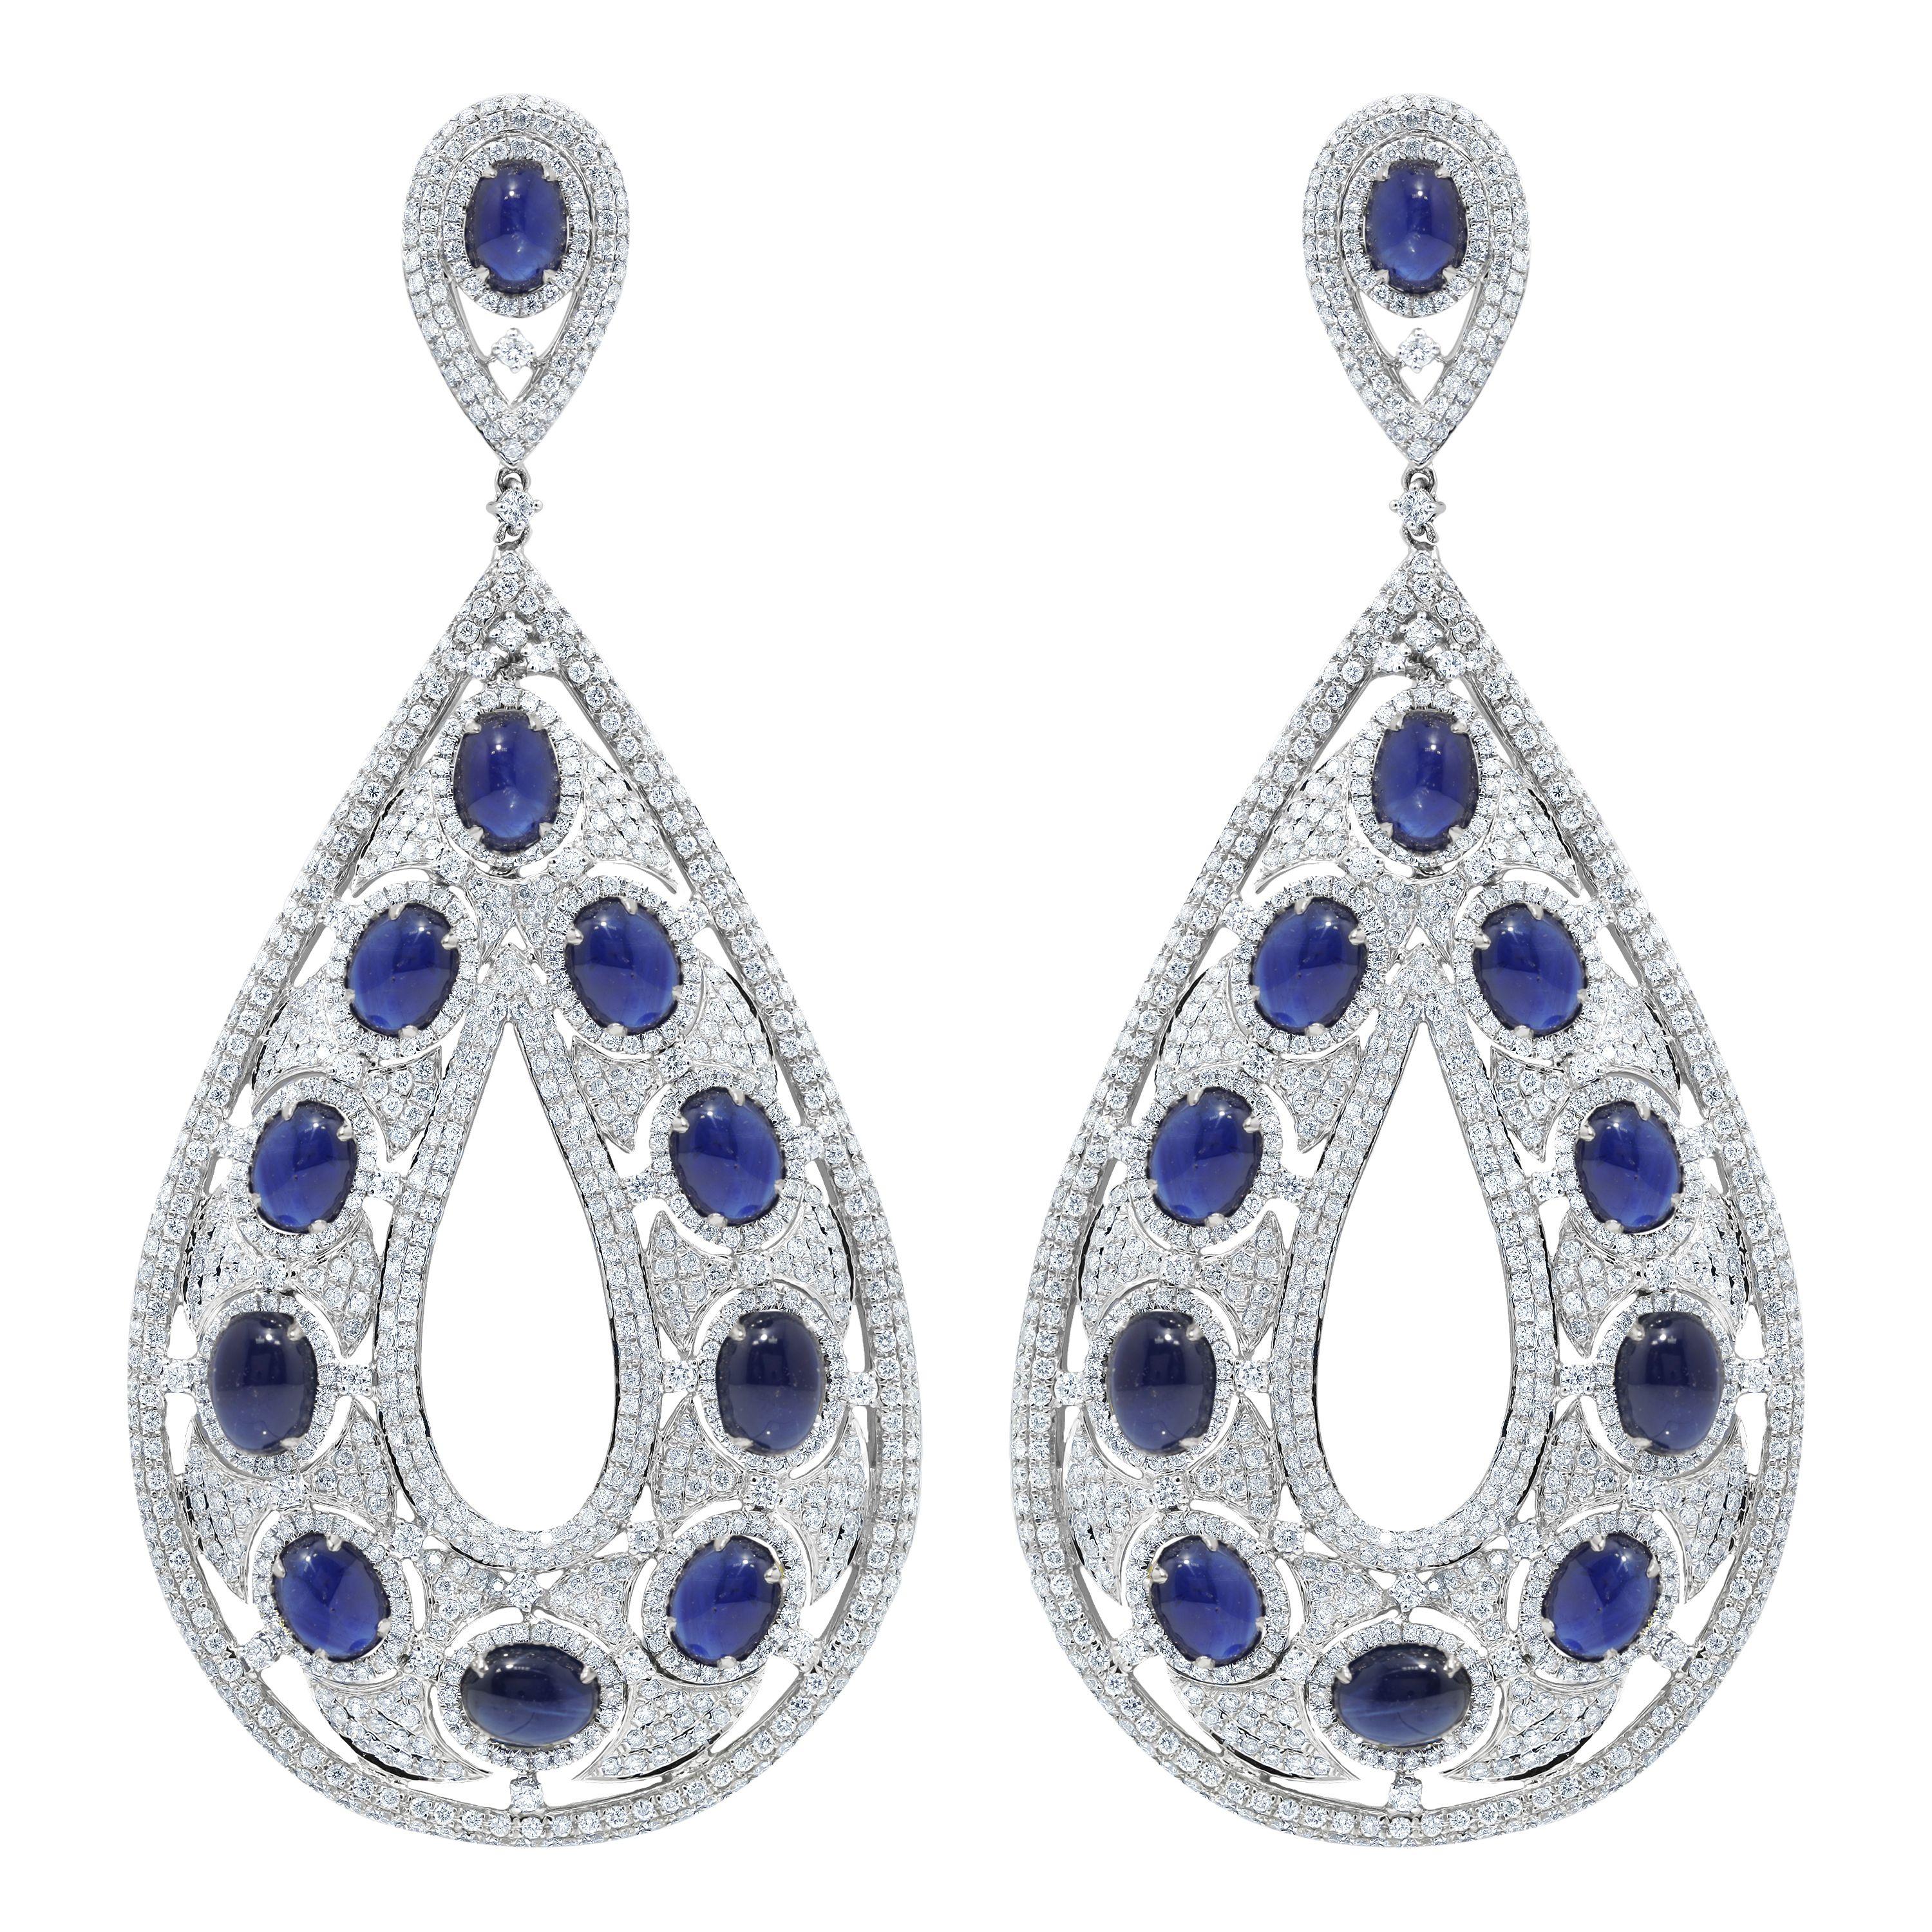 18 kt white gold diamond tear drop shaped earring adorned with 62.46 cts tw of oval cut cabochon sapphires surrounded by 14.75 cts tw of diamonds
4.5